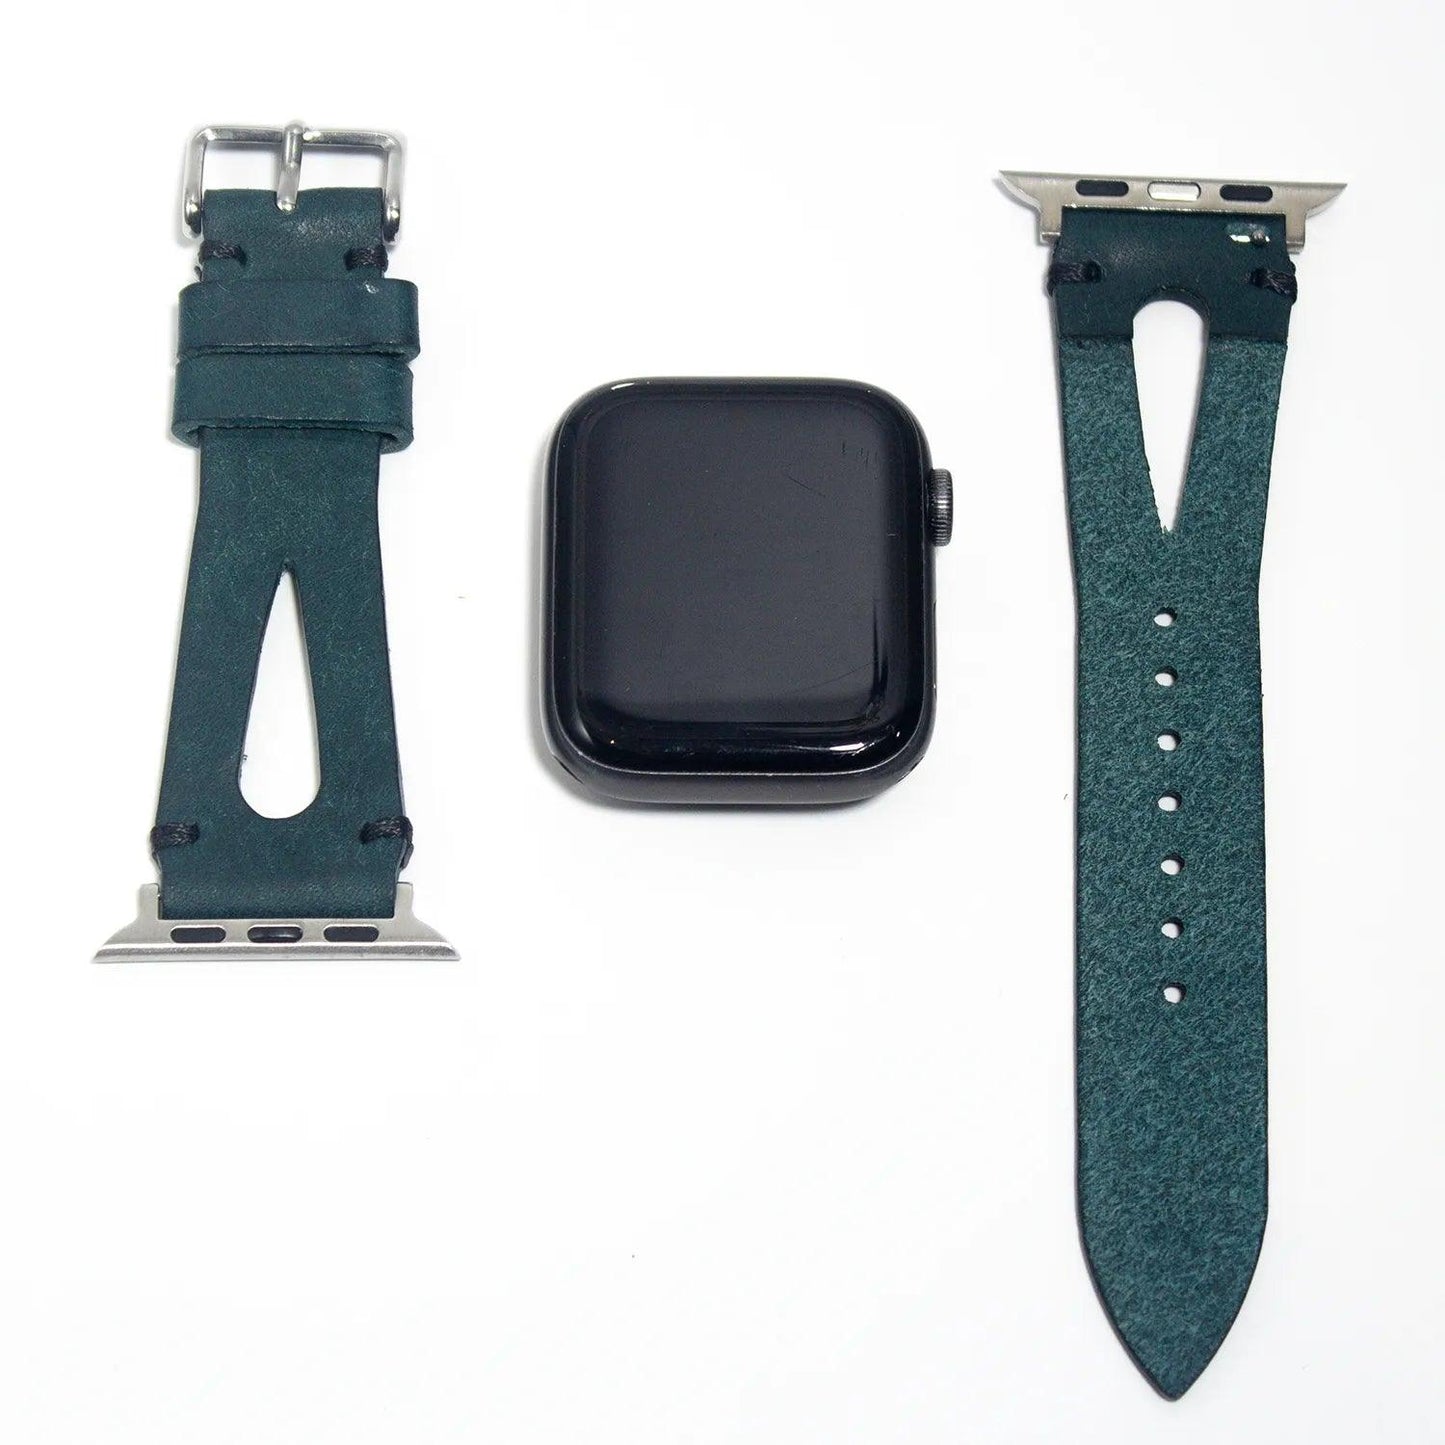 High-quality leather watch straps in dark cyan Pueblo leather, Italian craftsmanship for lasting durability and style.